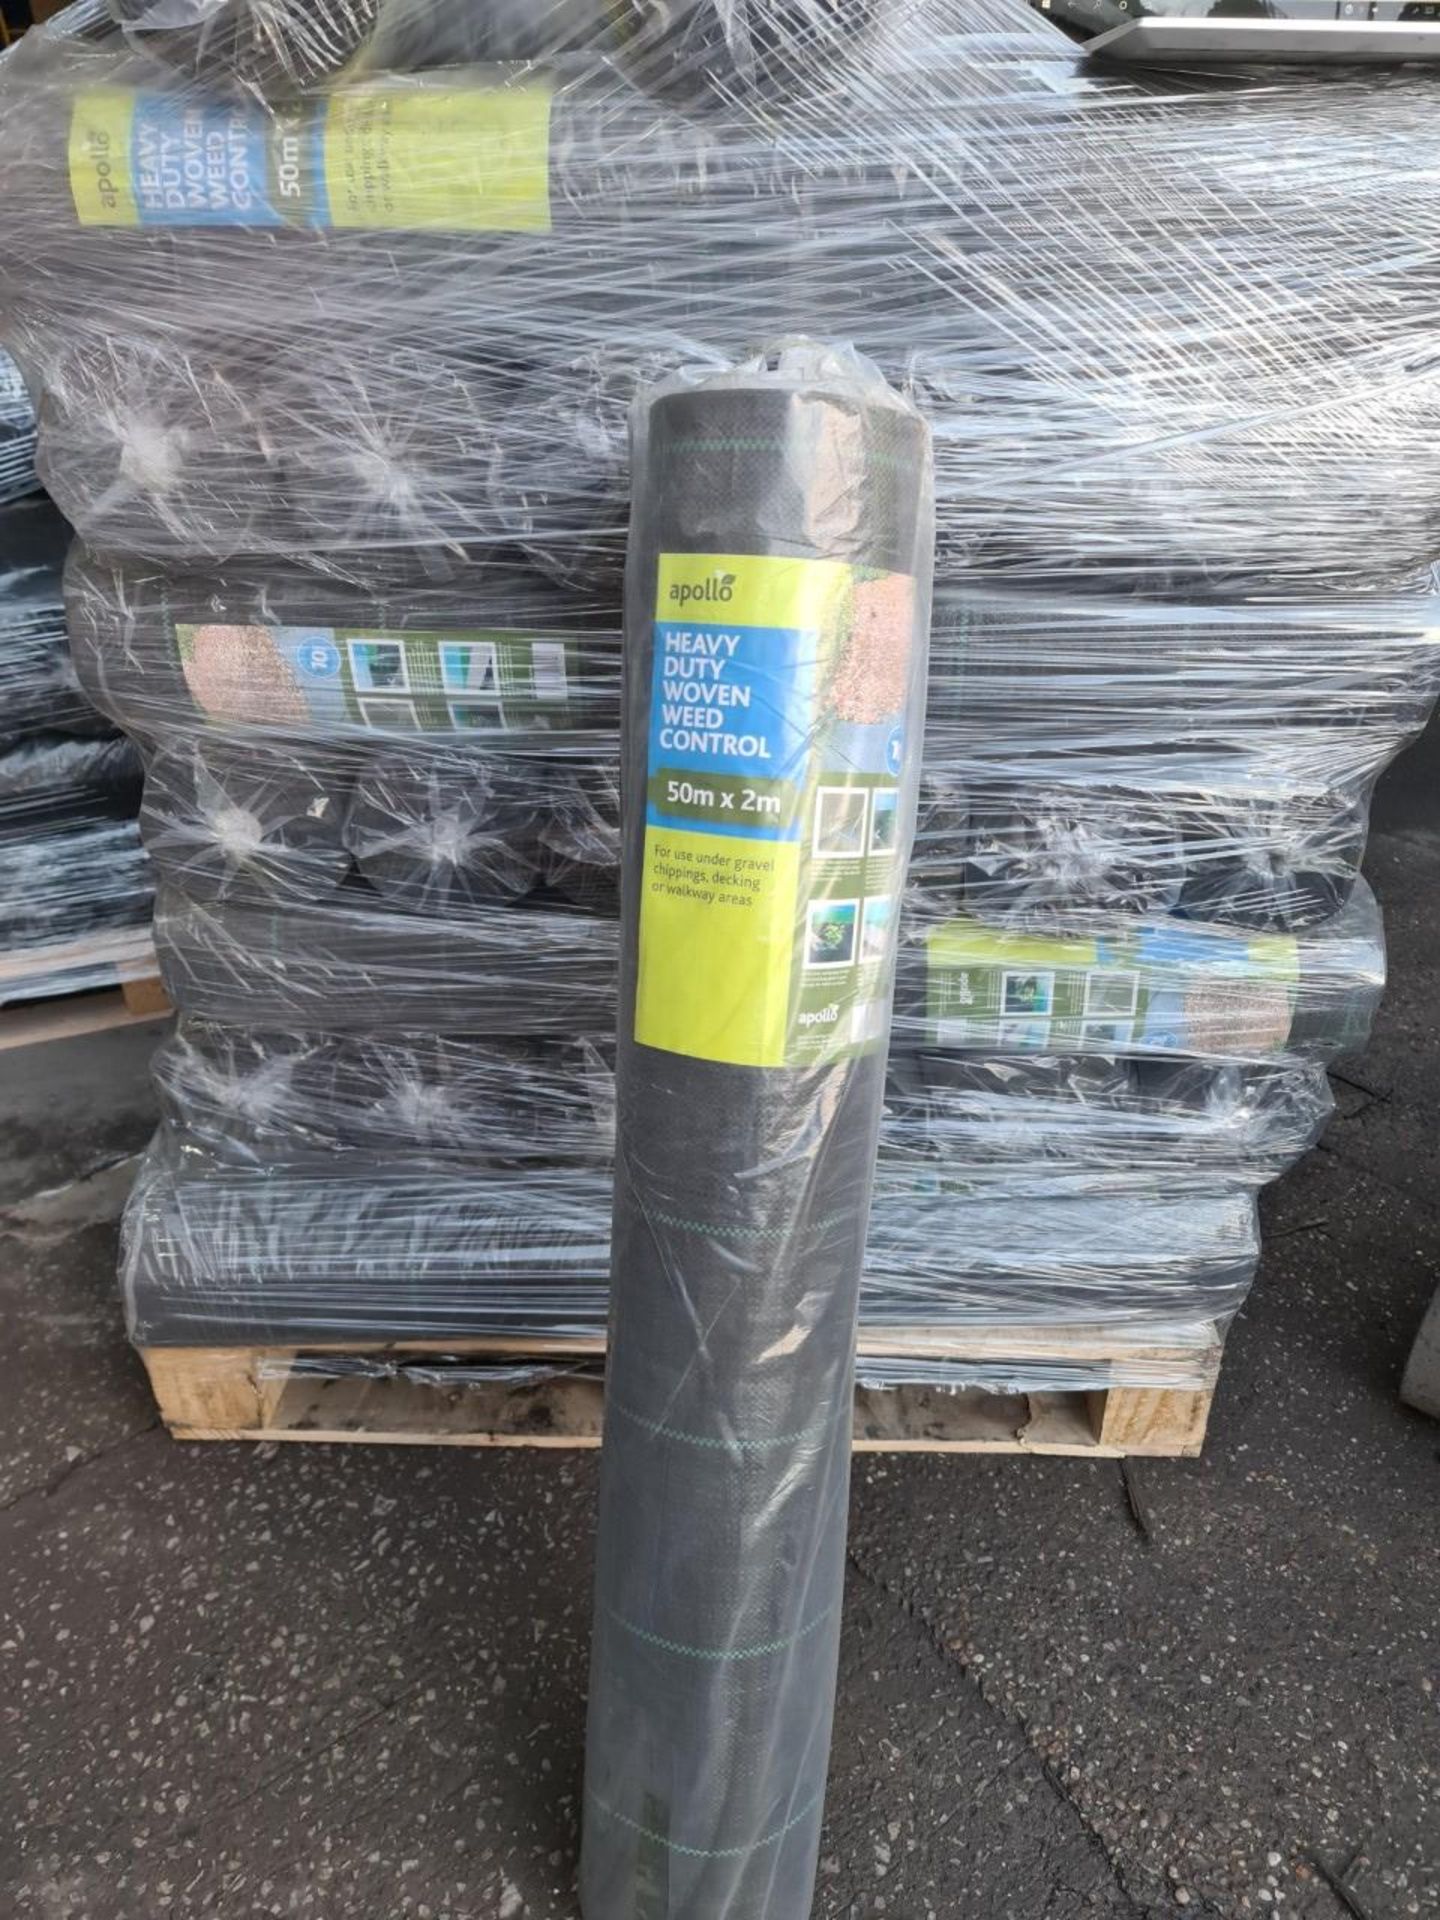 (J20) PALLET TO CONTAIN 45 x APOLO HEAVY DUTY WEED CONTROL 50 X2m. FOR USE UNDER GRAVEL CHIPPINGS, - Image 2 of 2